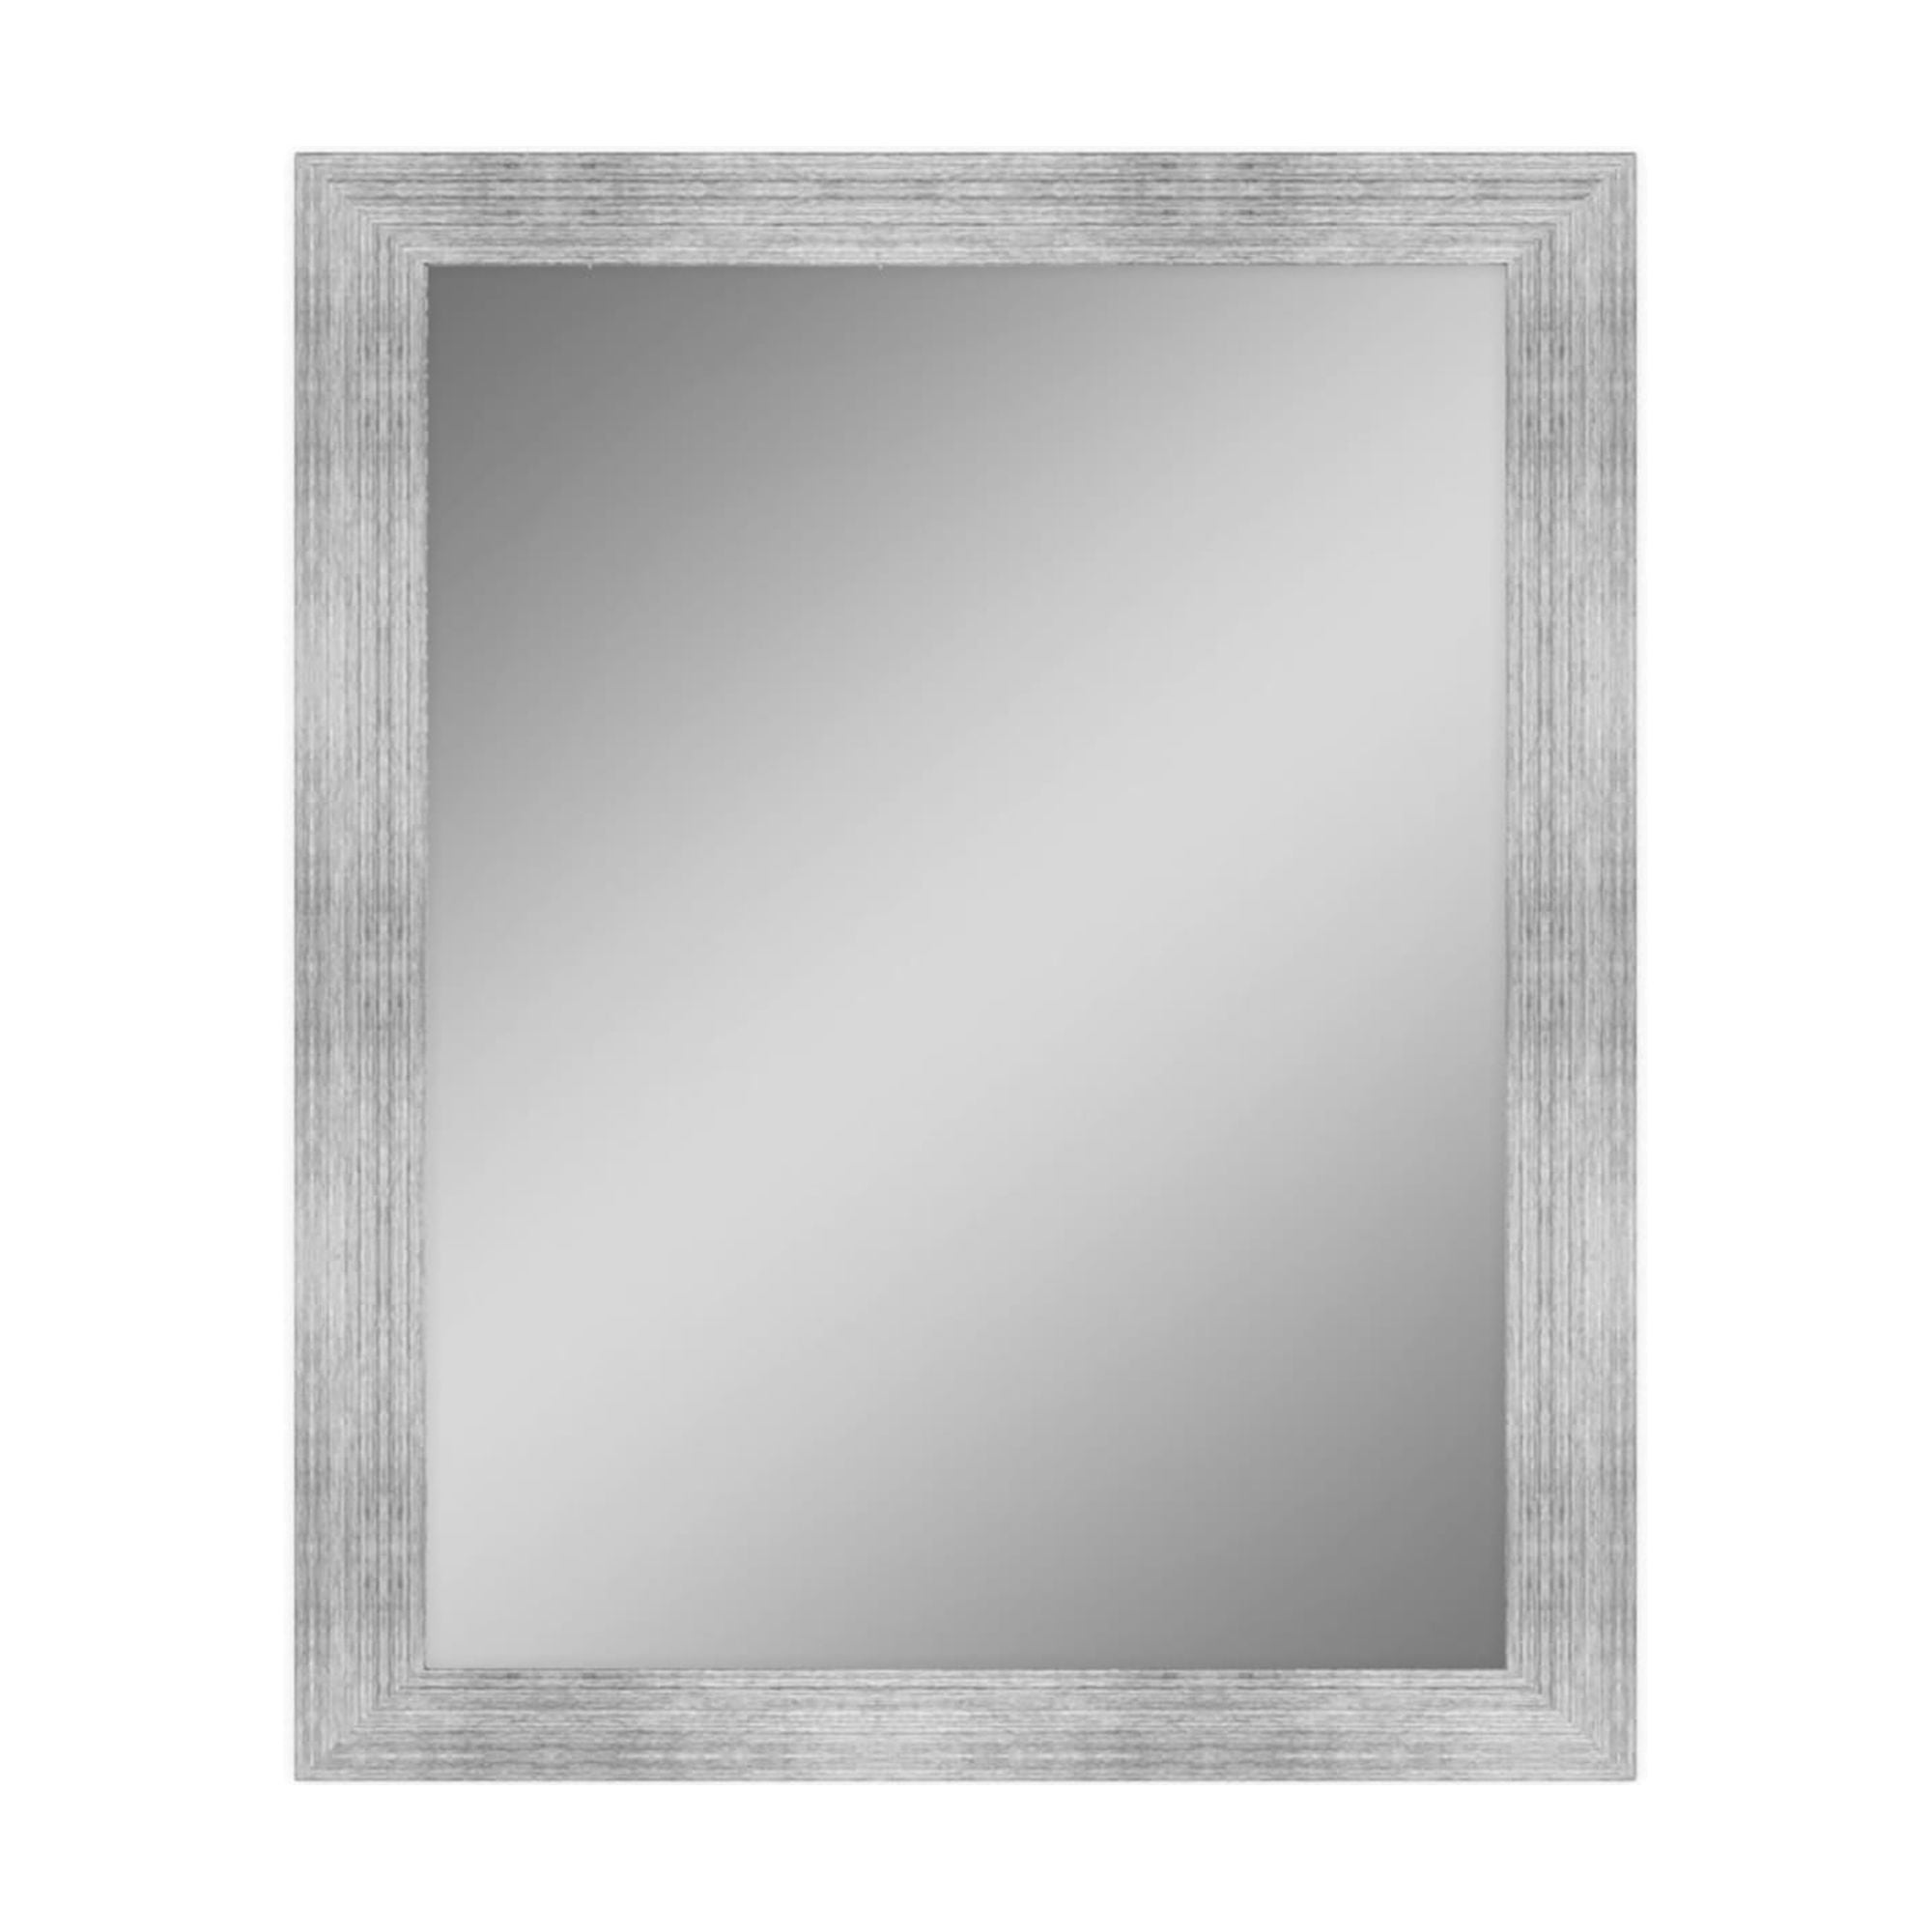 Driftwood 36 in. x 36 in. Mirror Frame Kit in White - Mirror Not Included